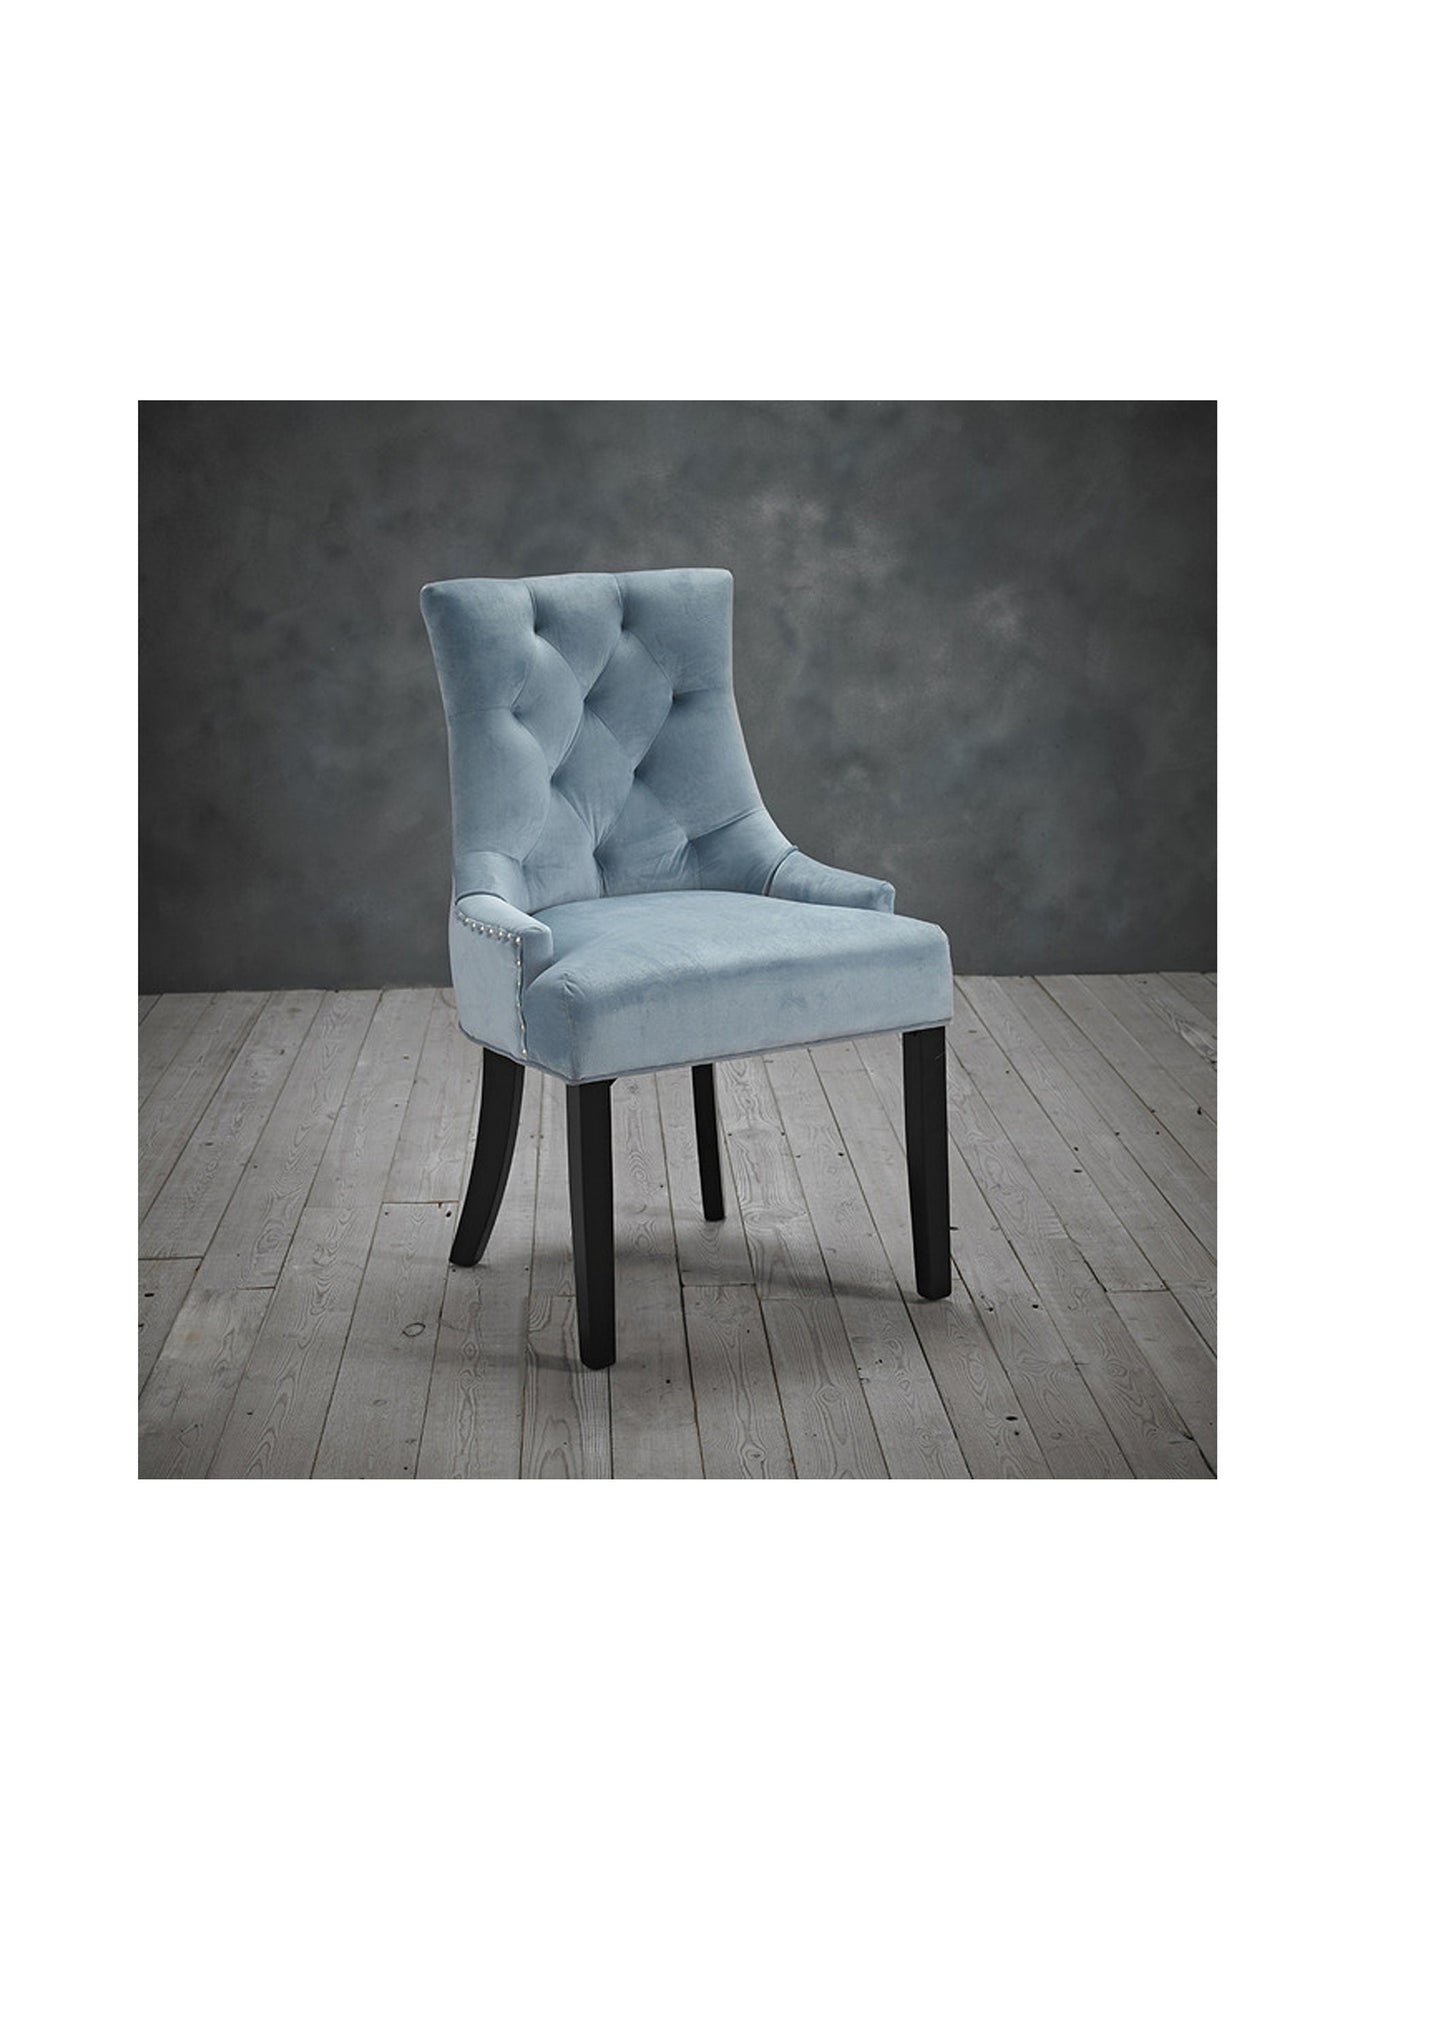 NEW Luxury Stylish Dining Velvet Buttoned chair with silver studs  - Pack of 2 -  Blue / Beige / Grey